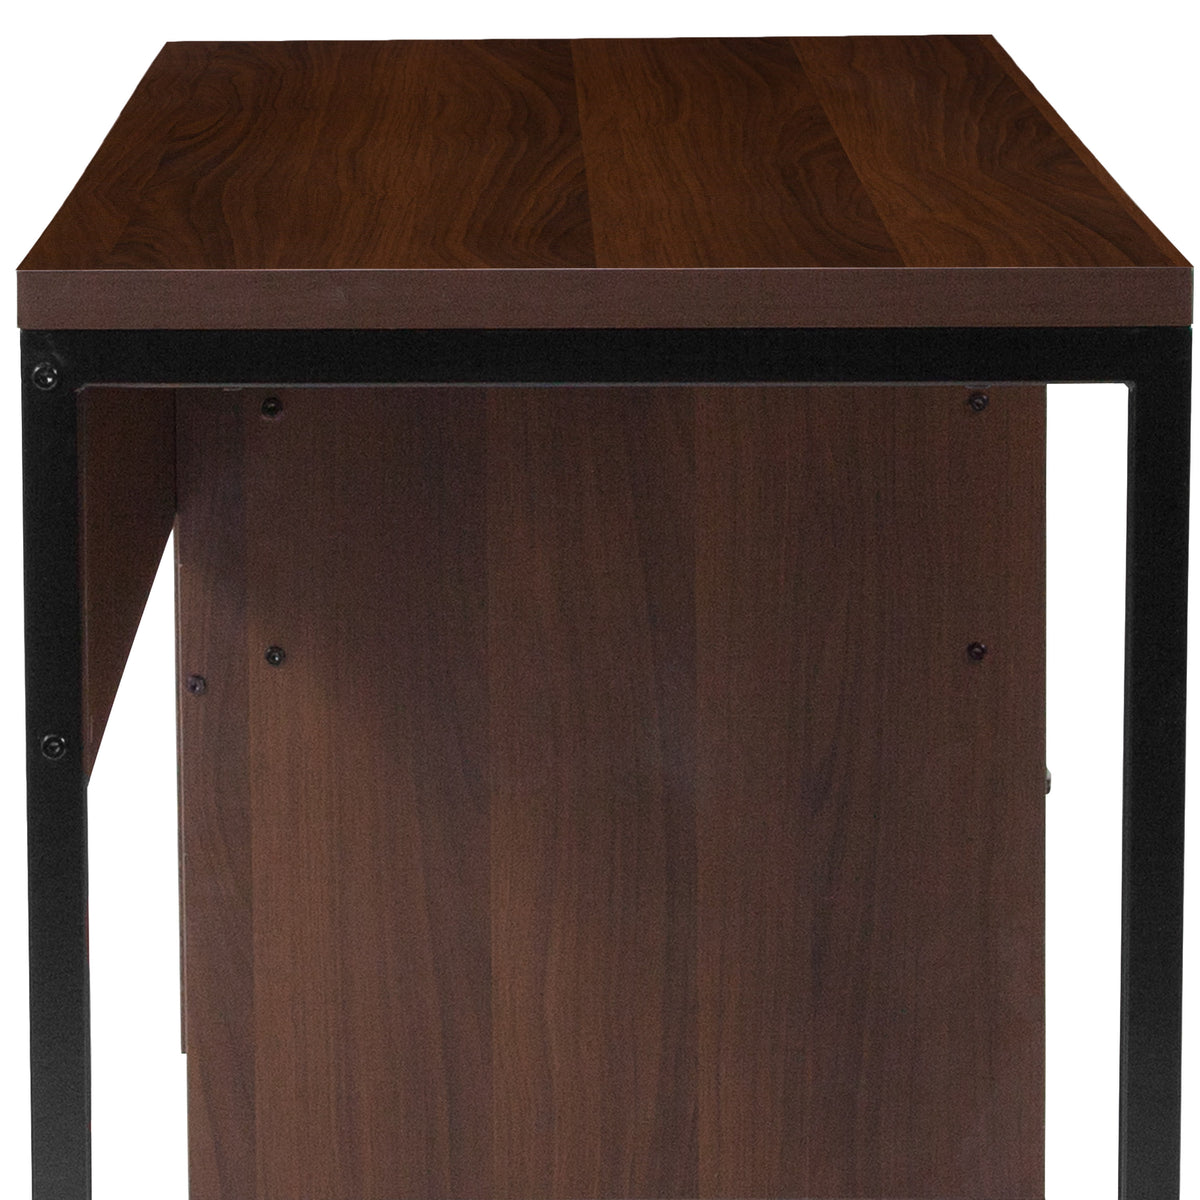 Rustic Coffee Wood Grain Finish Computer Desk with Black Metal Frame